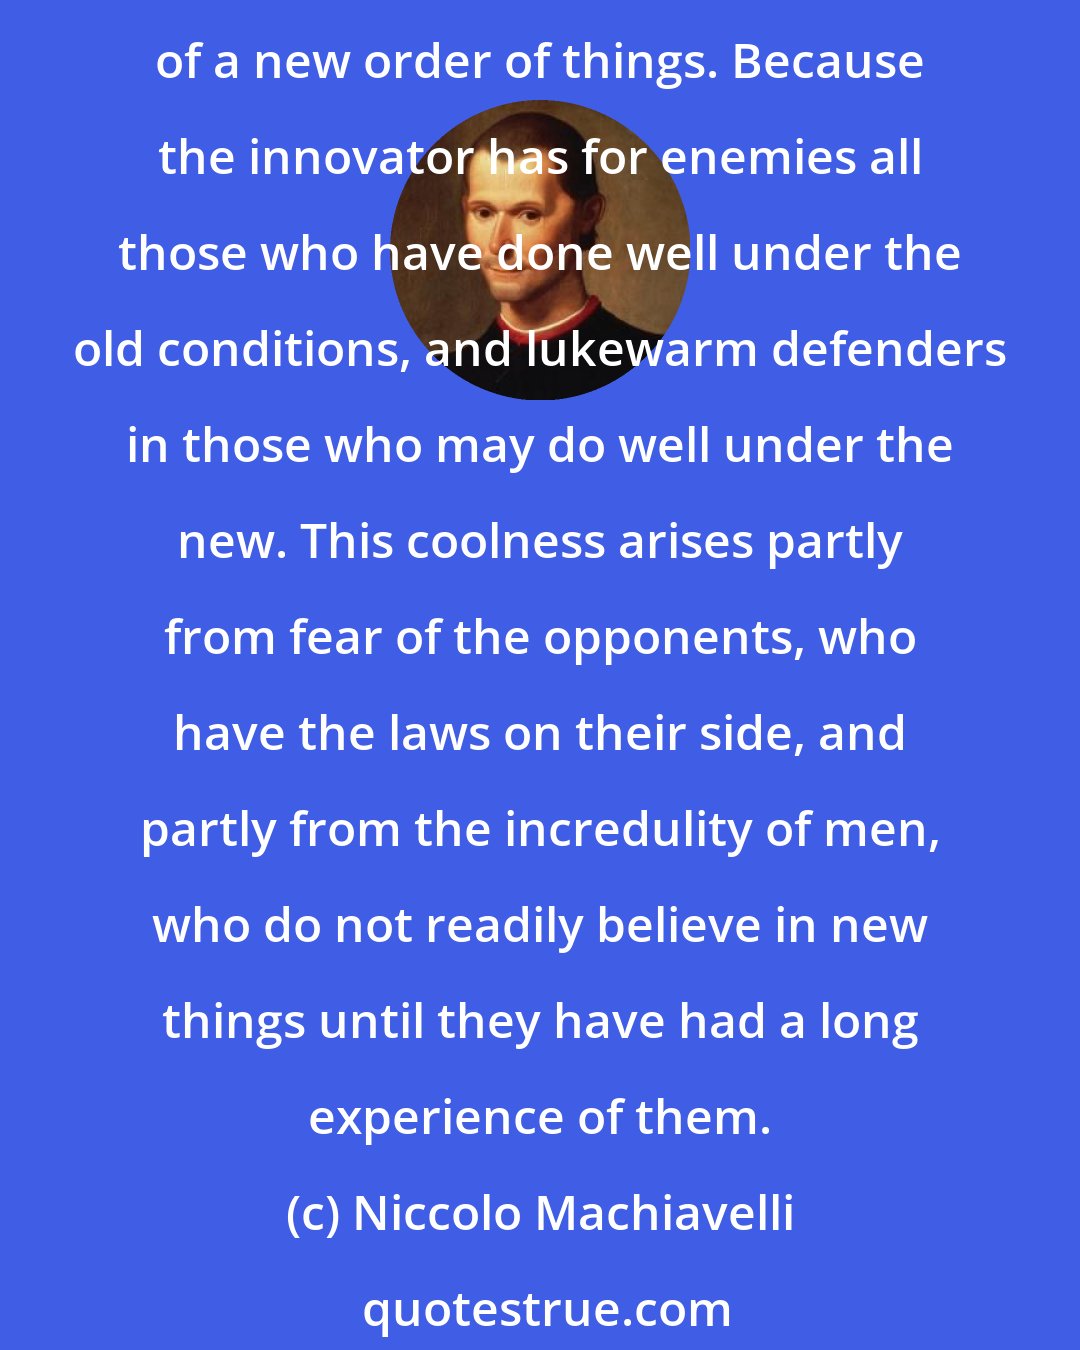 Niccolo Machiavelli: It ought to be remembered that there is nothing more difficult to take in hand, more perilous to conduct, or more uncertain in its success, than to take the lead in the introduction of a new order of things. Because the innovator has for enemies all those who have done well under the old conditions, and lukewarm defenders in those who may do well under the new. This coolness arises partly from fear of the opponents, who have the laws on their side, and partly from the incredulity of men, who do not readily believe in new things until they have had a long experience of them.